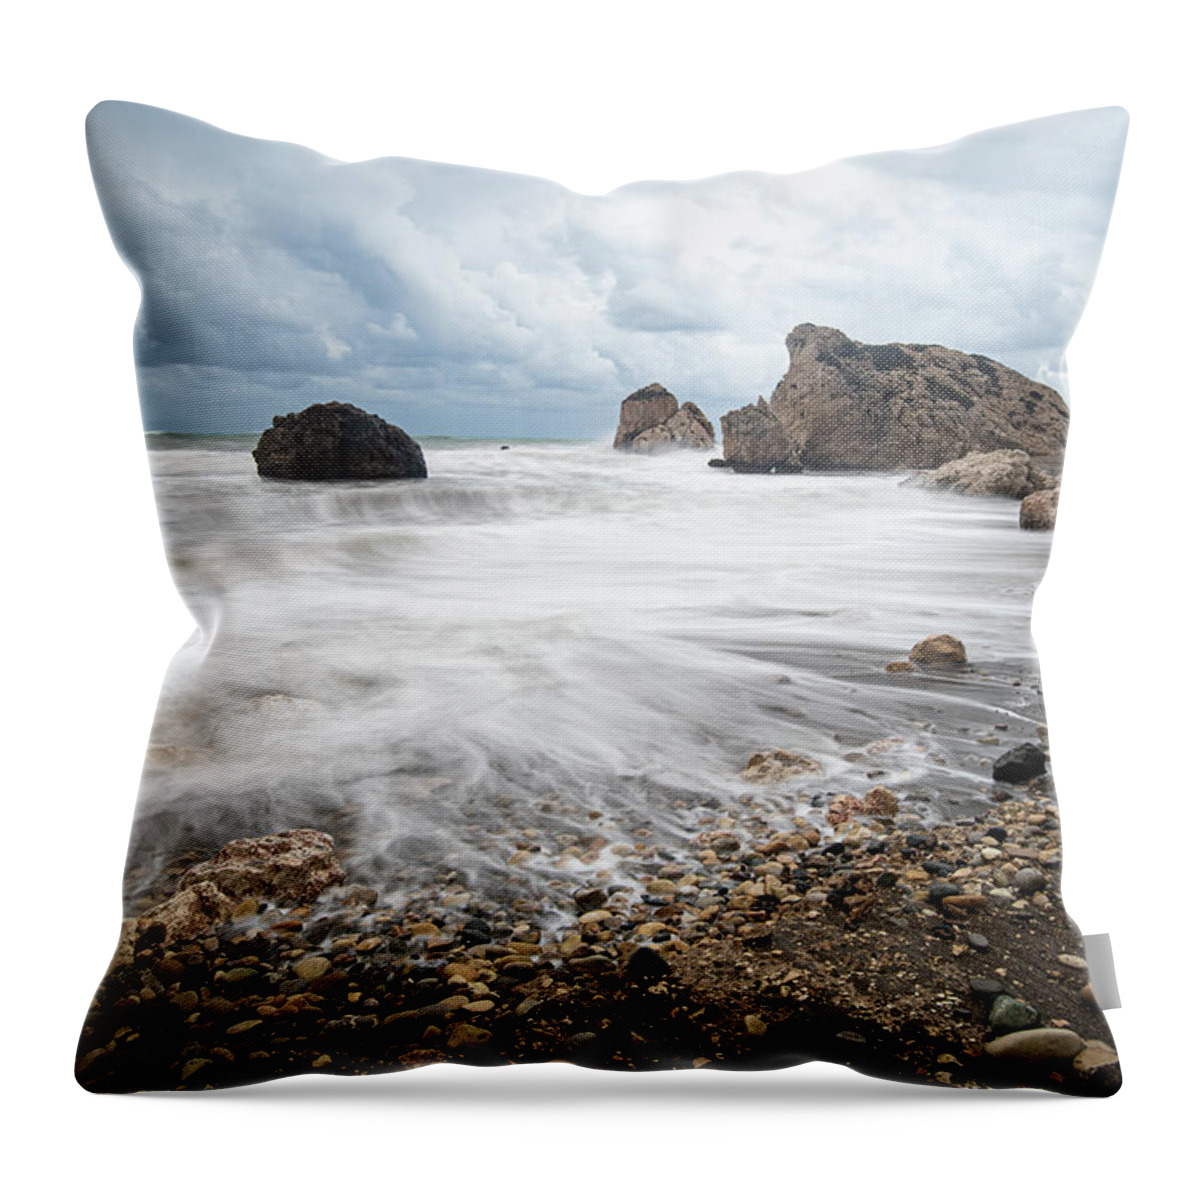 Sea Waves Throw Pillow featuring the photograph Seascape with windy waves during stormy weather on a rocky coast by Michalakis Ppalis